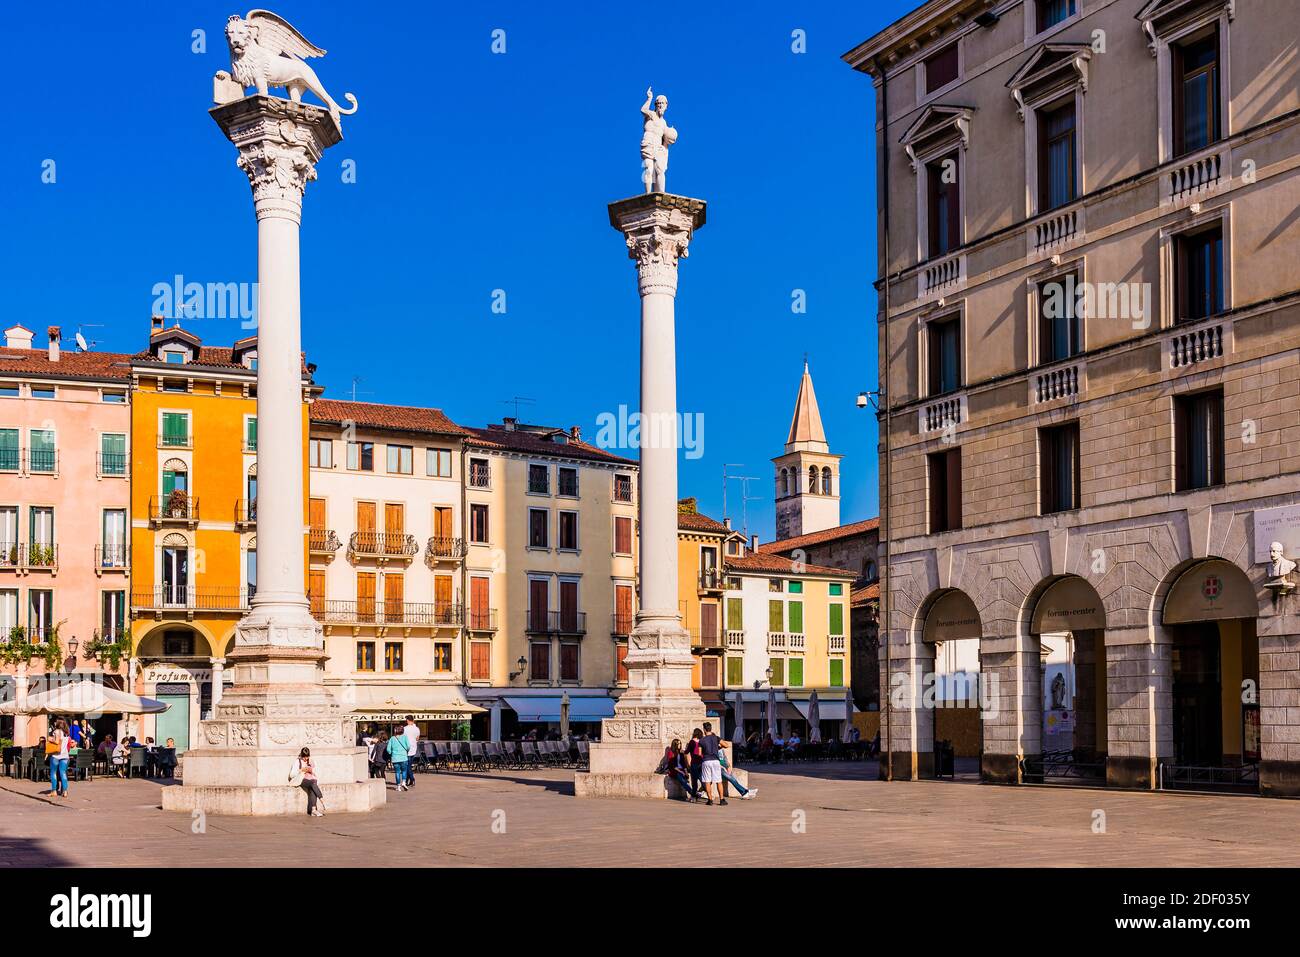 Piazza dei Signori, city square. The two columns, on the left the winged lion, symbol of Saint Mark and the Republic of Venice. Rigt, the redentore, C Stock Photo